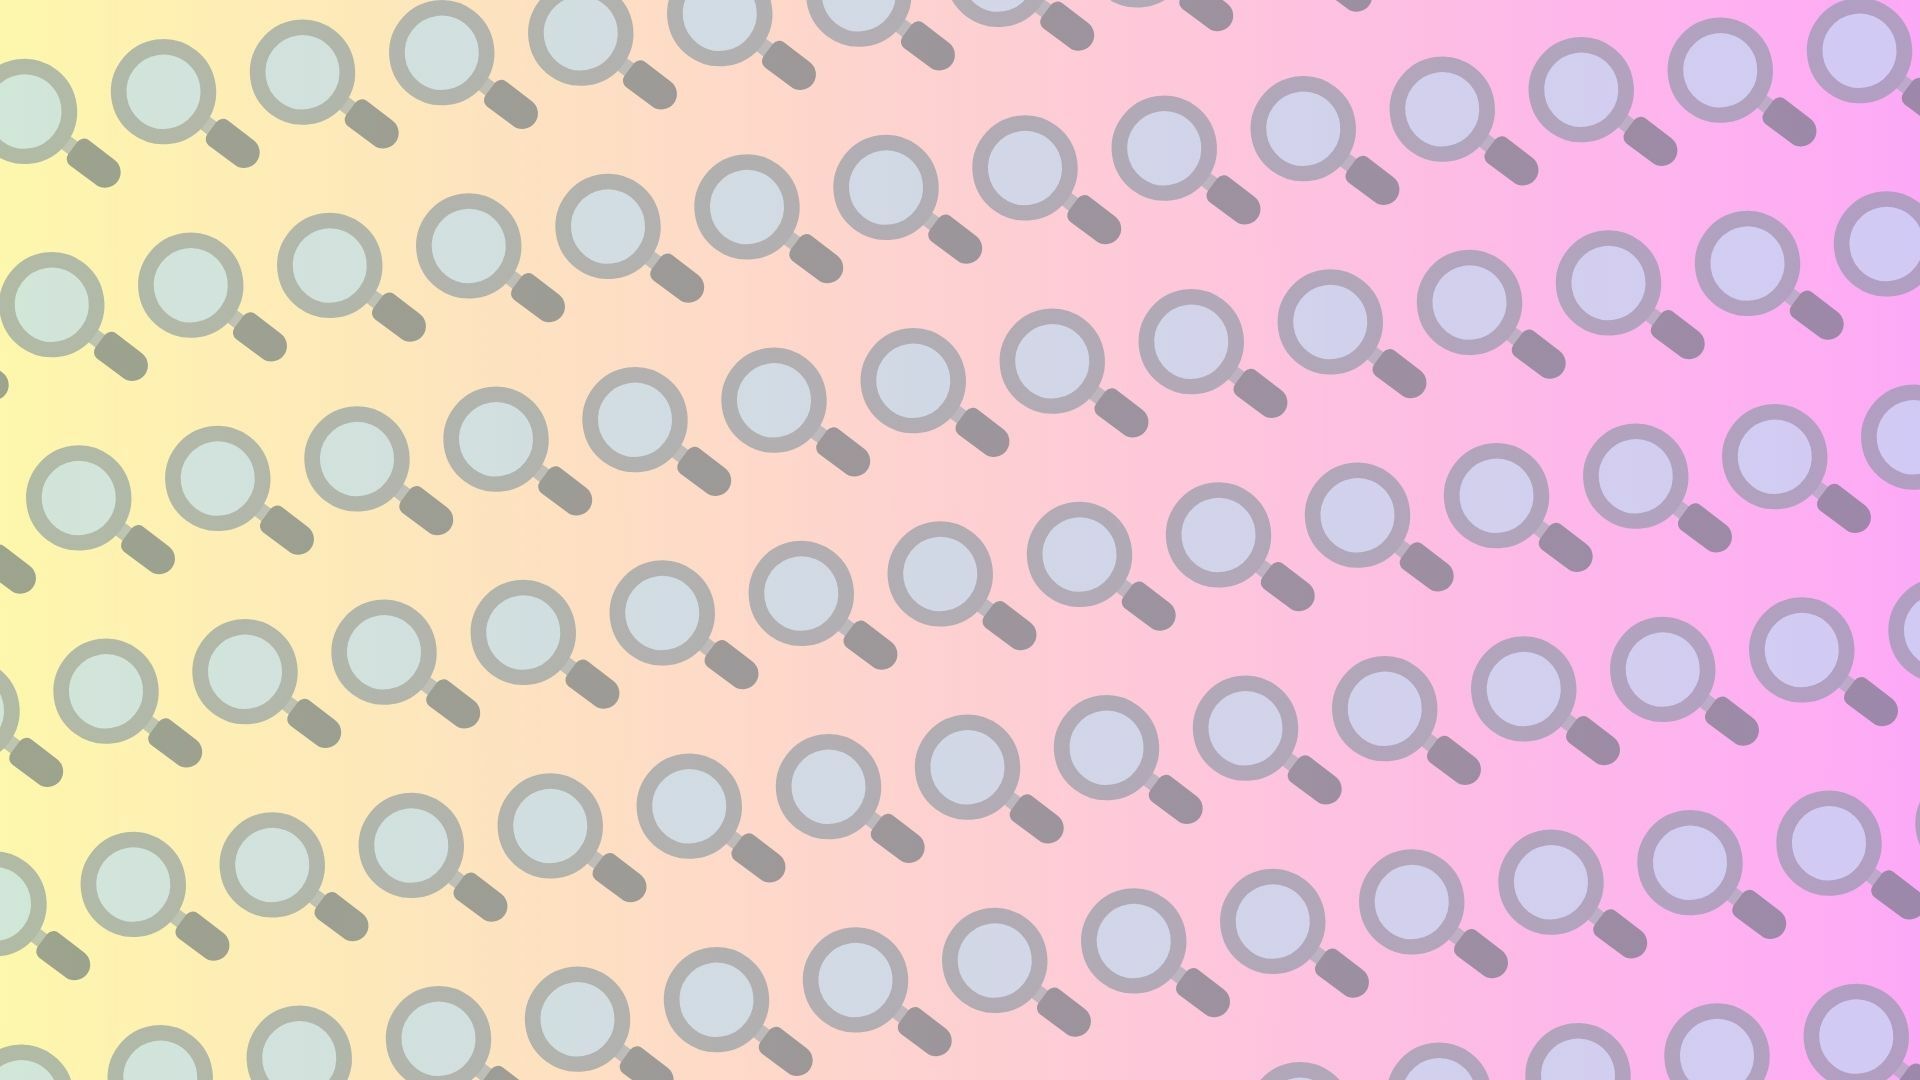 A pattern of the magnifying glass emoji on a gradient background.